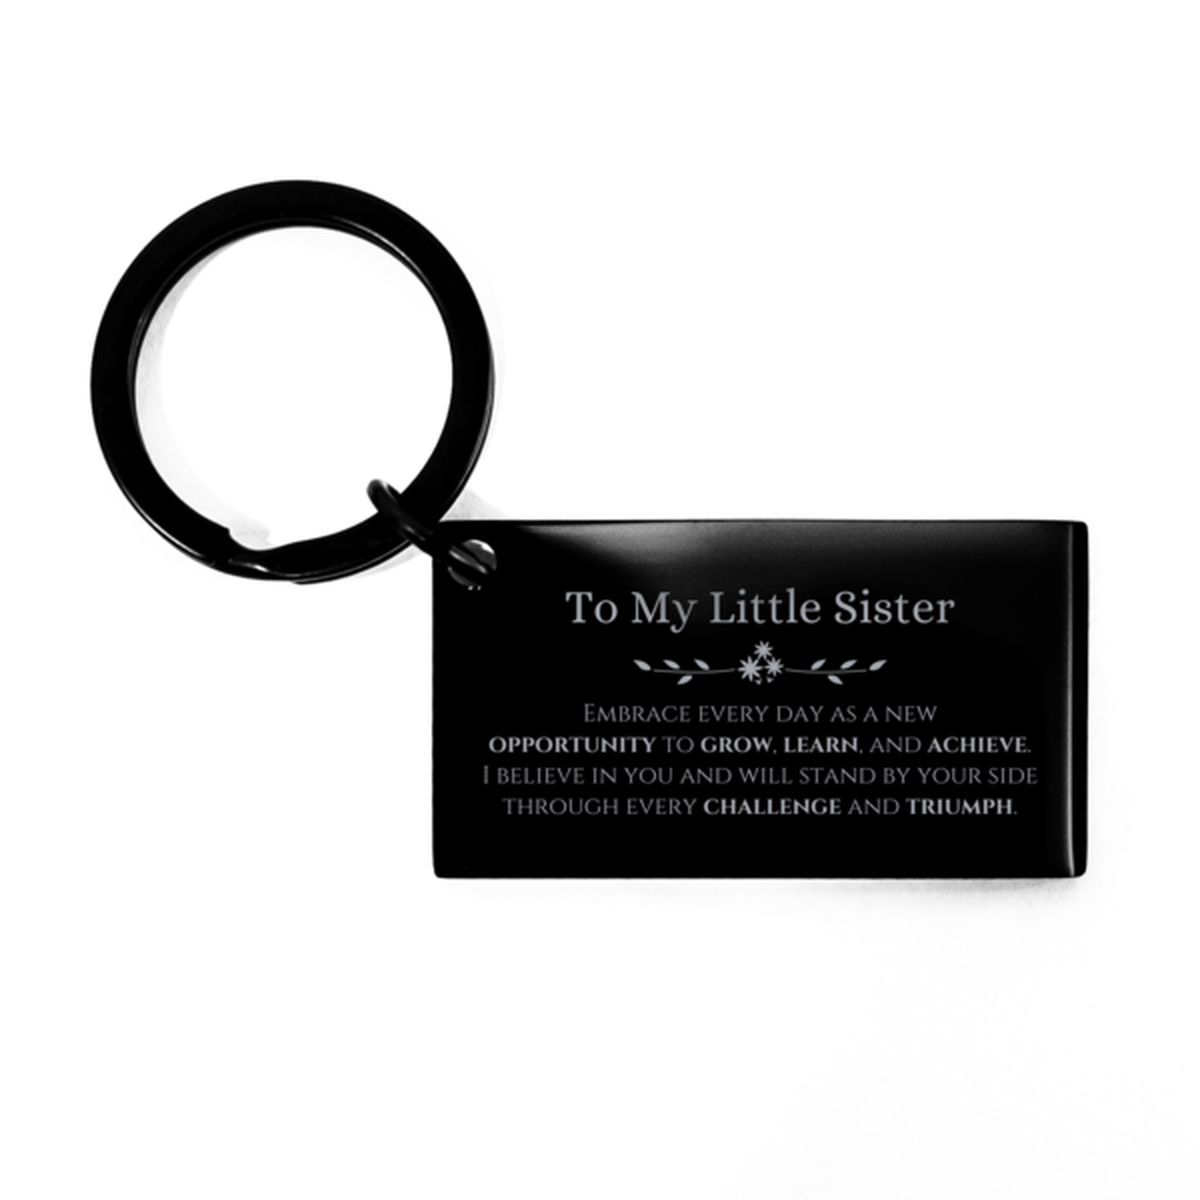 To My Little Sister Gifts, I believe in you and will stand by your side, Inspirational Keychain For Little Sister, Birthday Christmas Motivational Little Sister Gifts